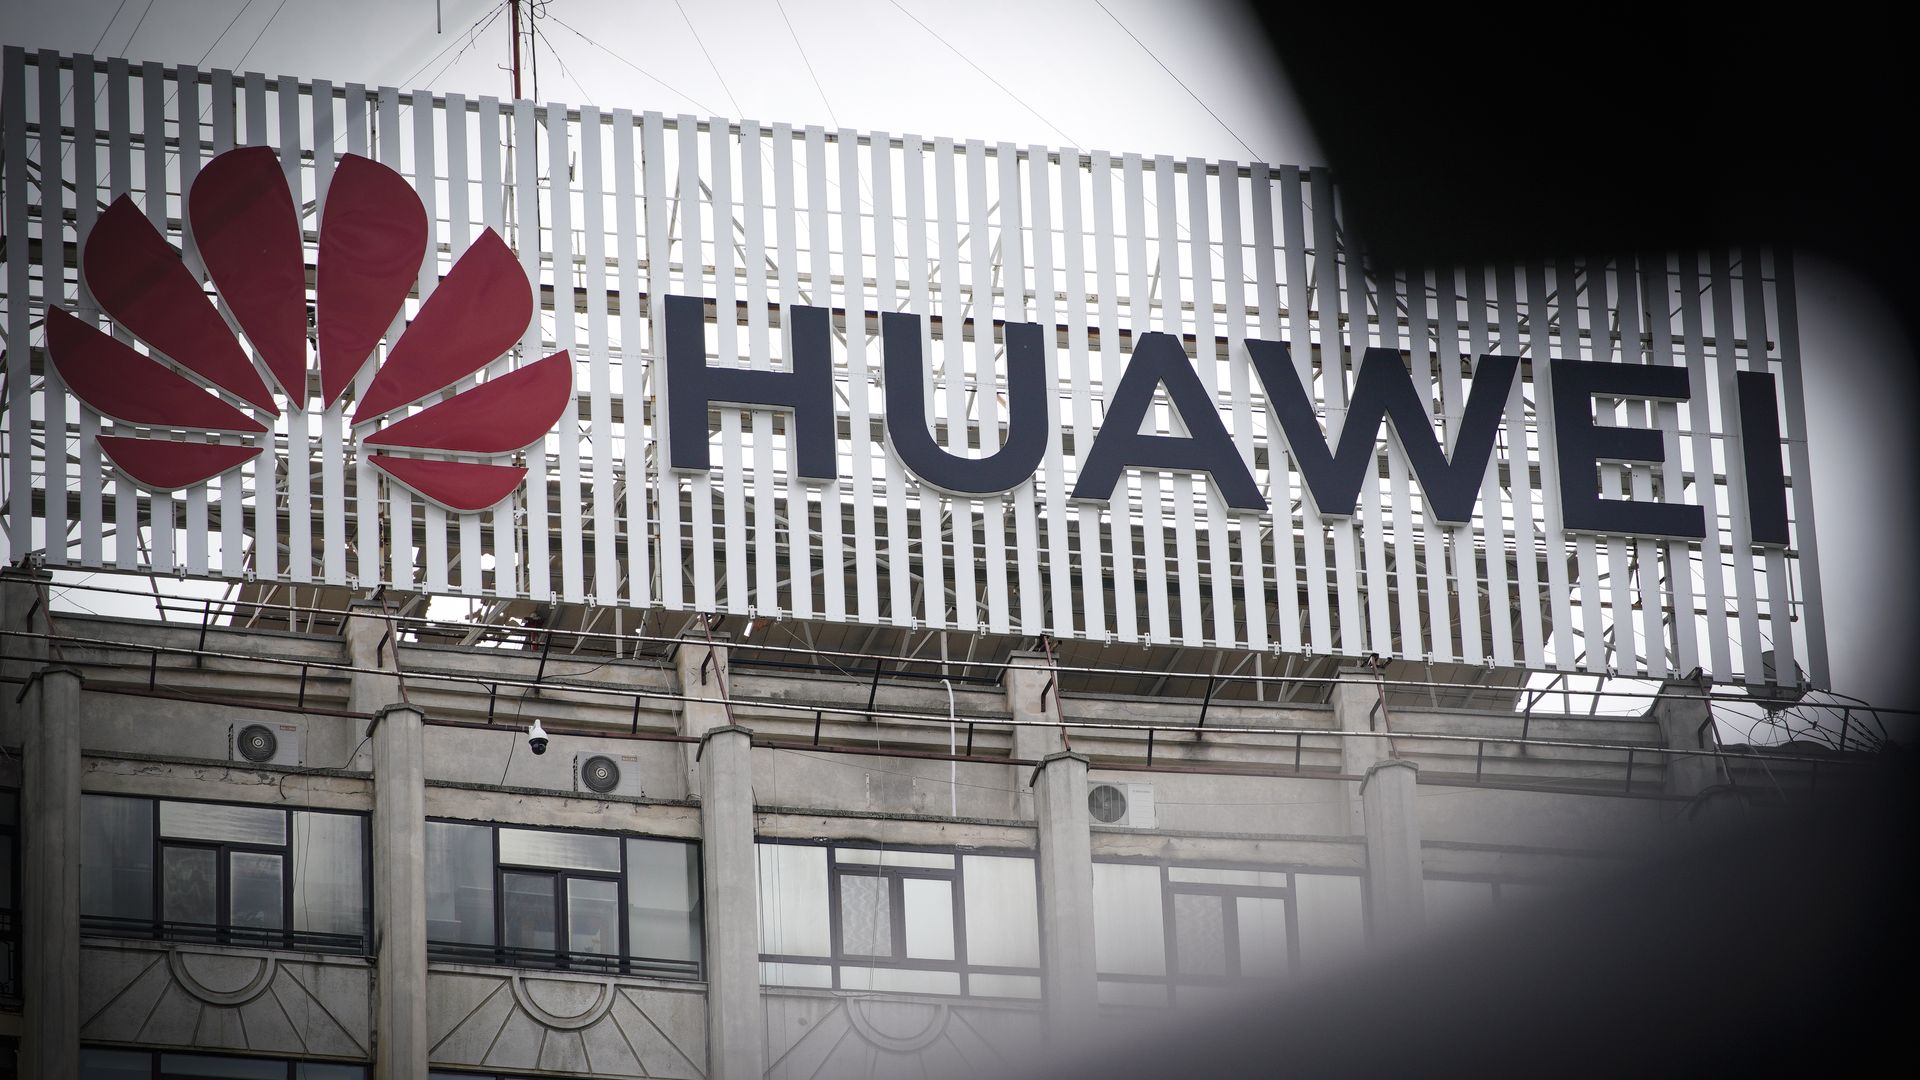 In this image, the Huawei sign and logo is displayed prominently on a building.